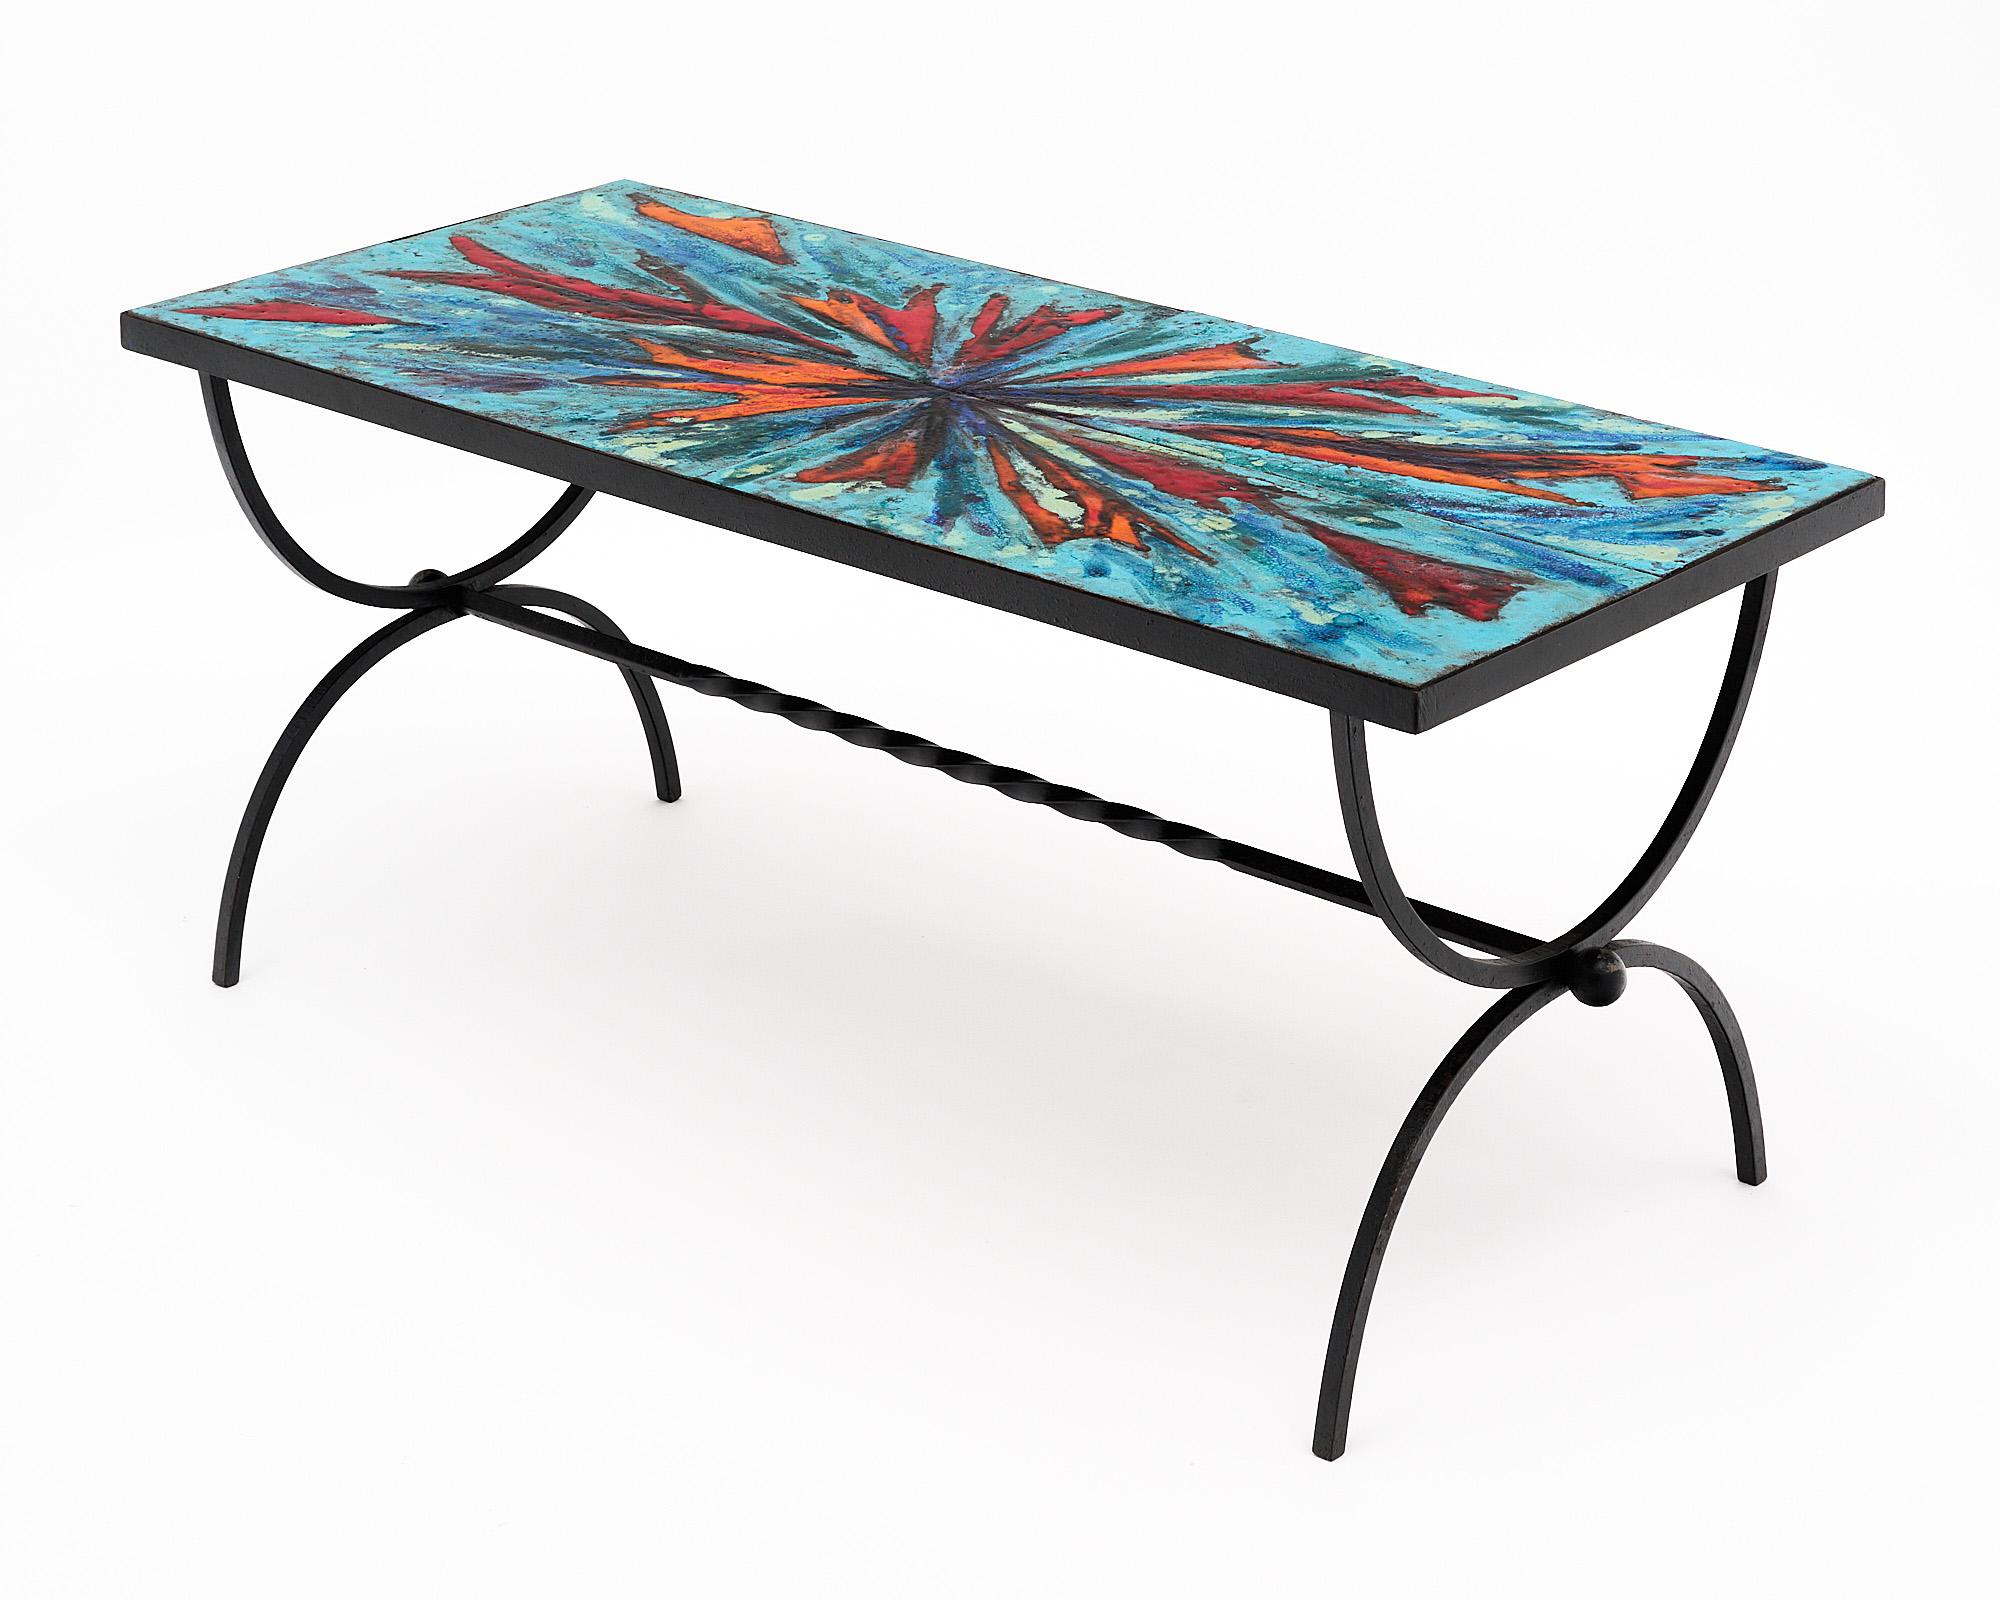 Coffee table from Vallauris on the French Riviera. This piece has a structure of hand-hammered forged iron. It is covered with thick terracotta hand painted tiles with an abstract motif in vivid colors.